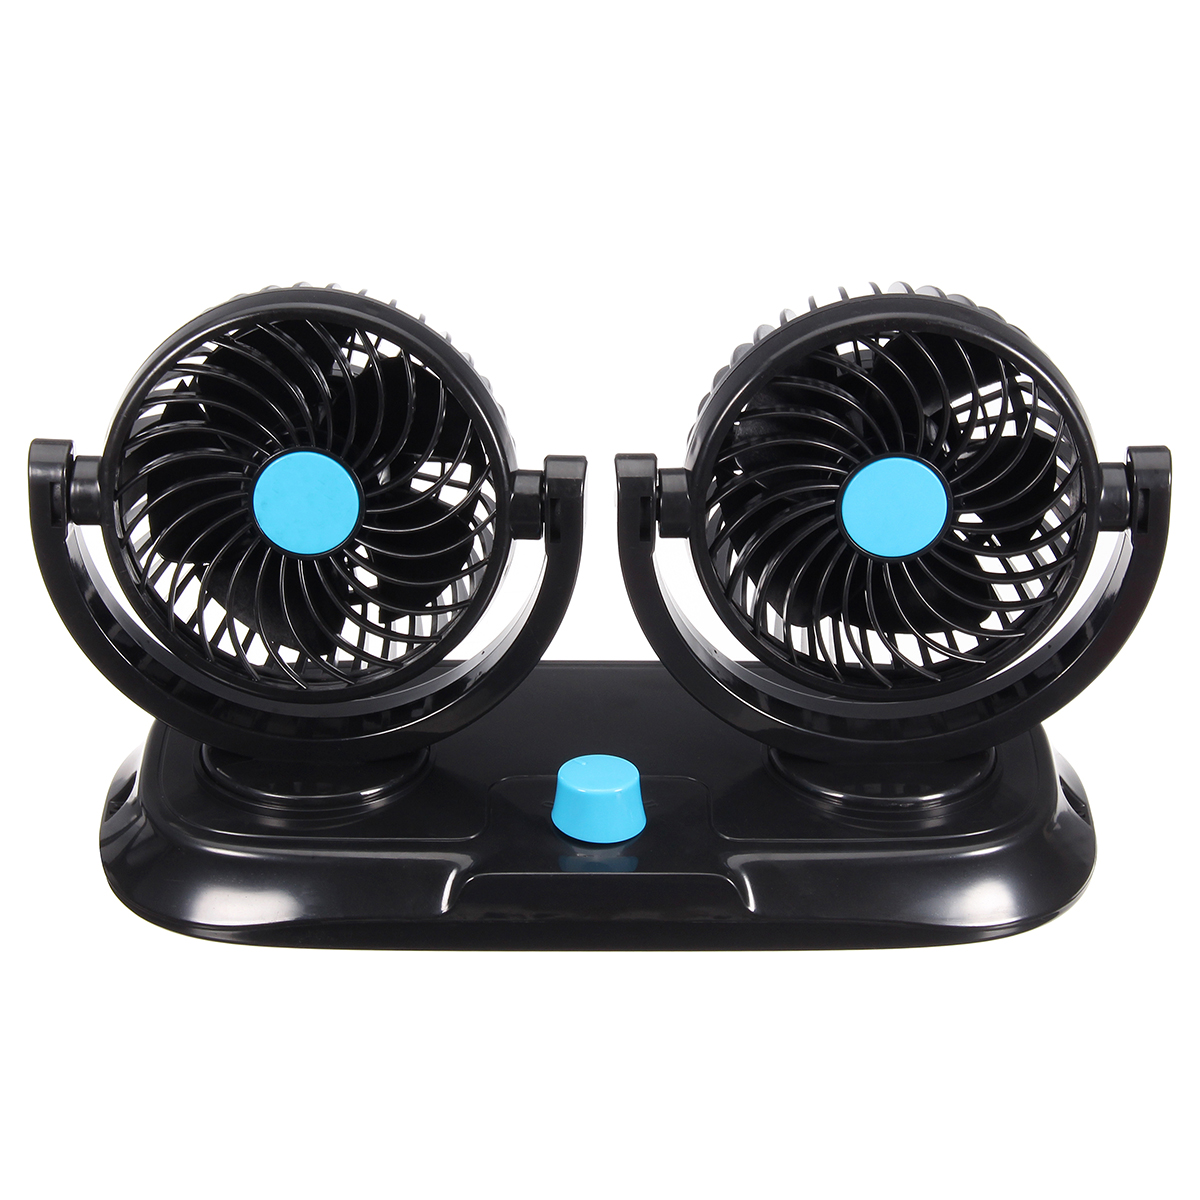 12V-Adjustable-Double-360-Degrees-Mini-Oscillating-Fan-Rotation-Cooling-Fan-Air-Conditioner-1338437-2